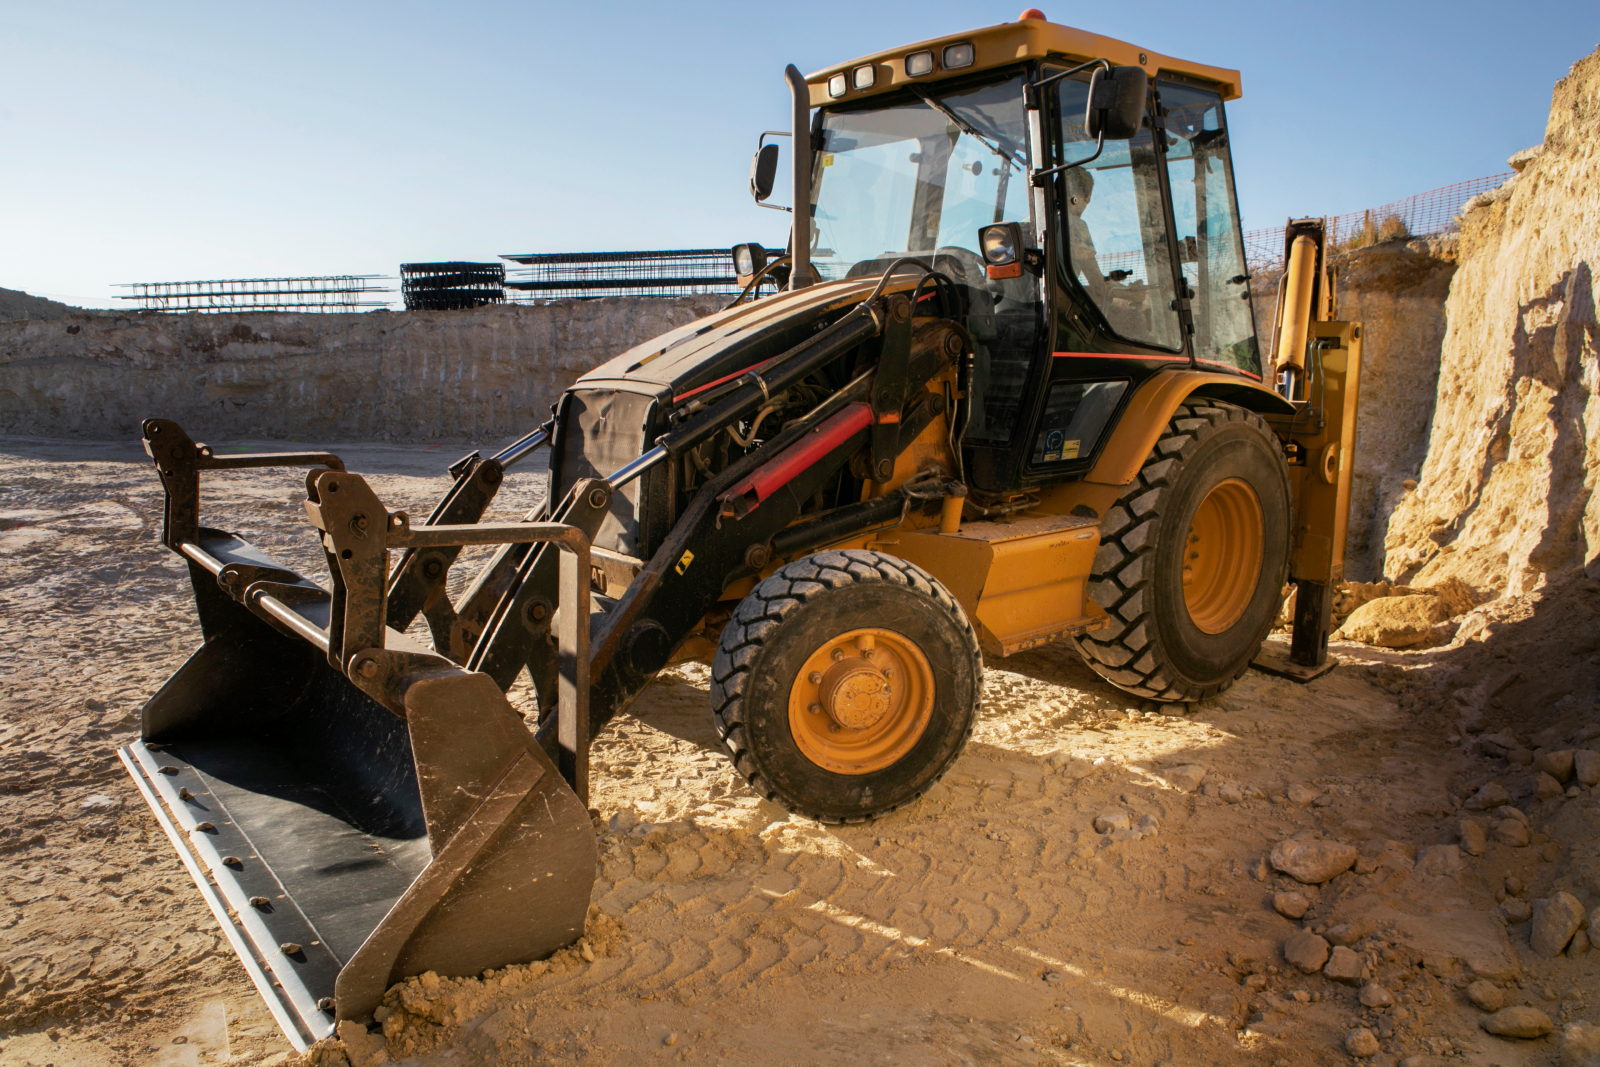 Image showing an excavator on a construction site